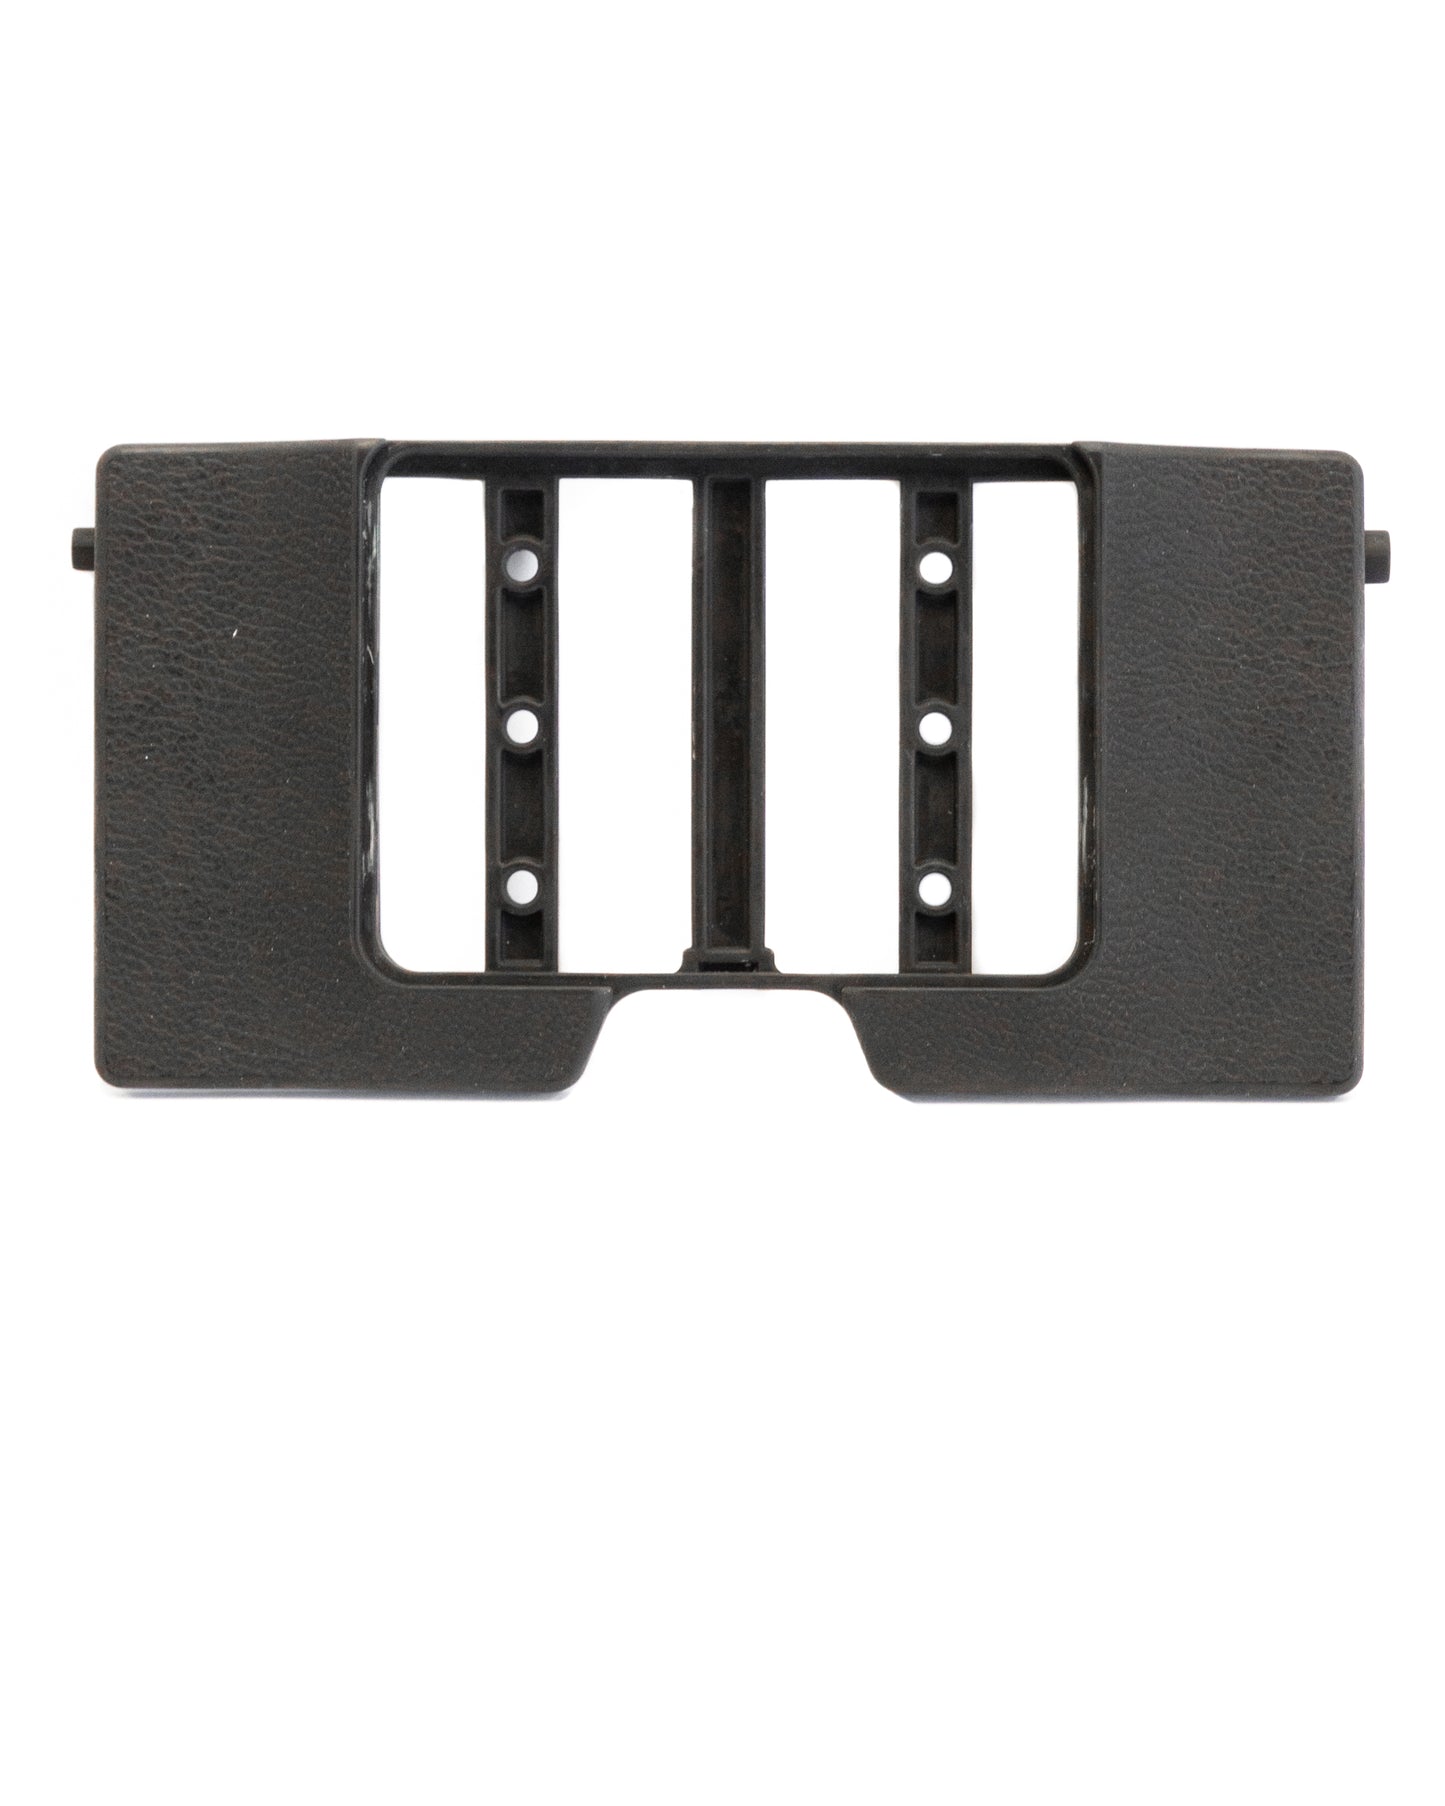 Flip Down mount to suit Switch Pros in a 200 Series Landcruiser - Sunglasses Holder Replacement